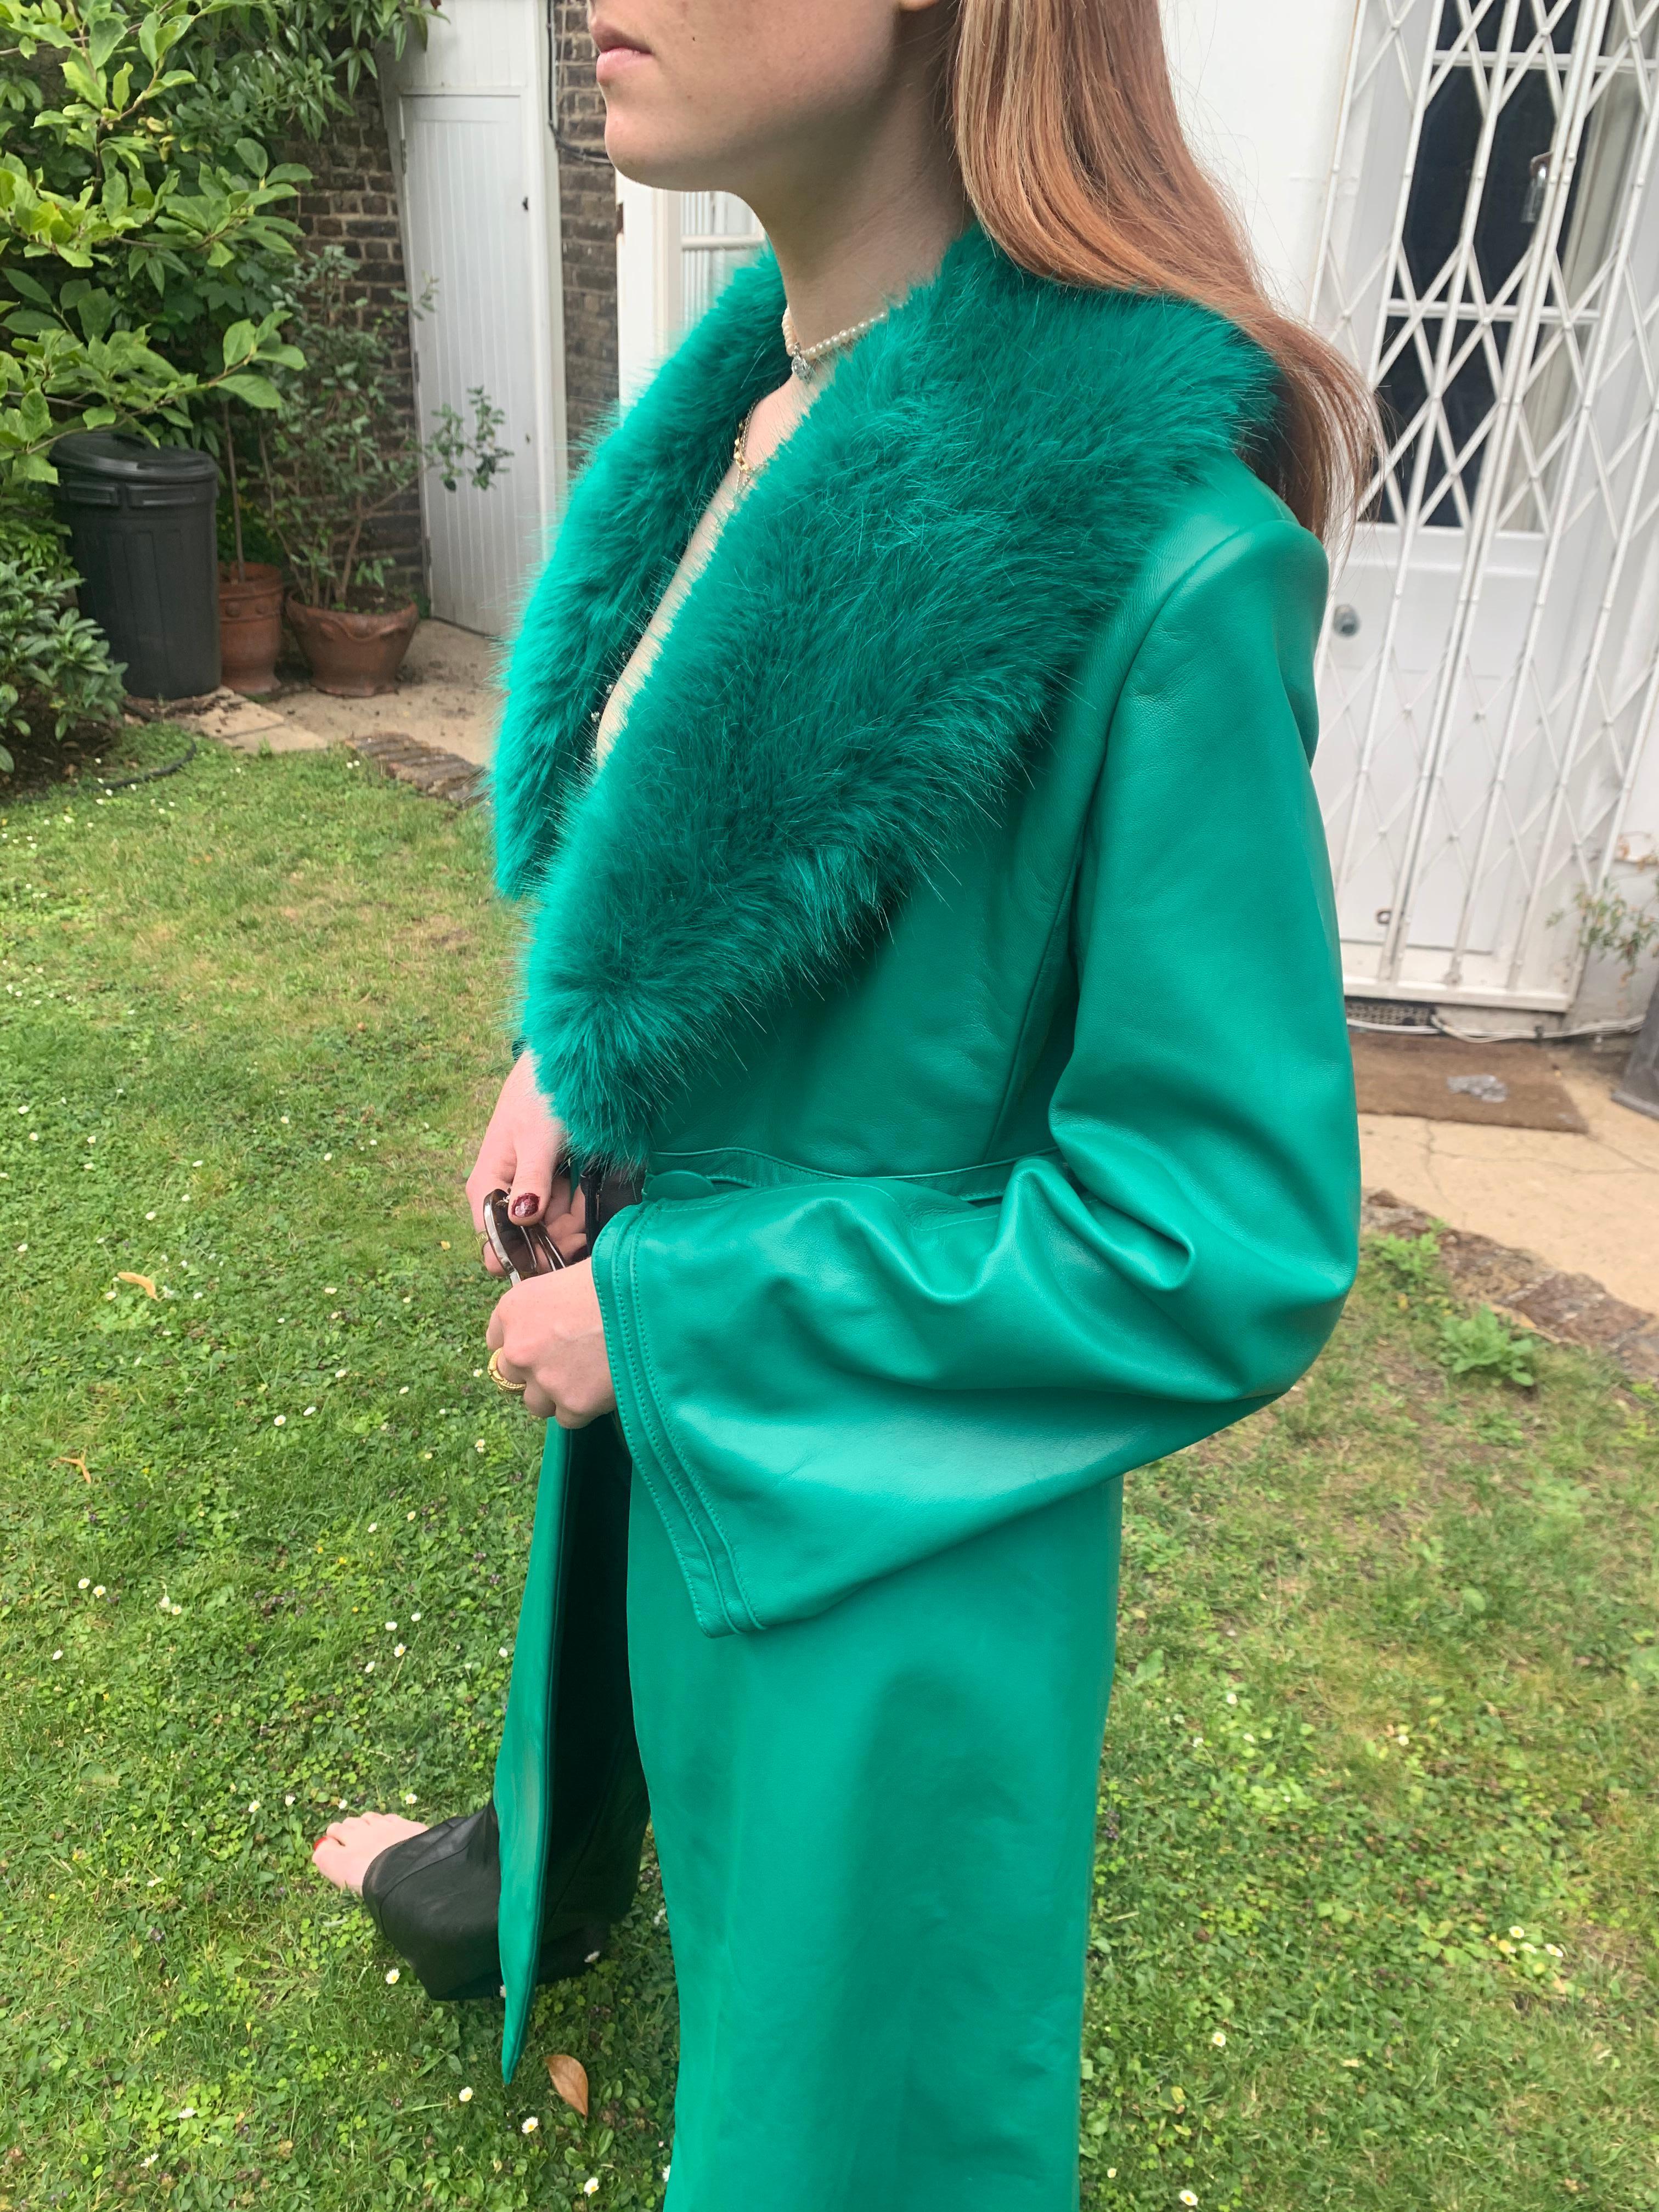 Verheyen London Edward Leather Coat in Emerald Green & Green Faux Fur - Size 8 UK 

The Edward Leather Coat created by Verheyen London is a romantic design inspired by the 1970s and Edwardian Era of Fashion.  A timeless design to be be worn for a